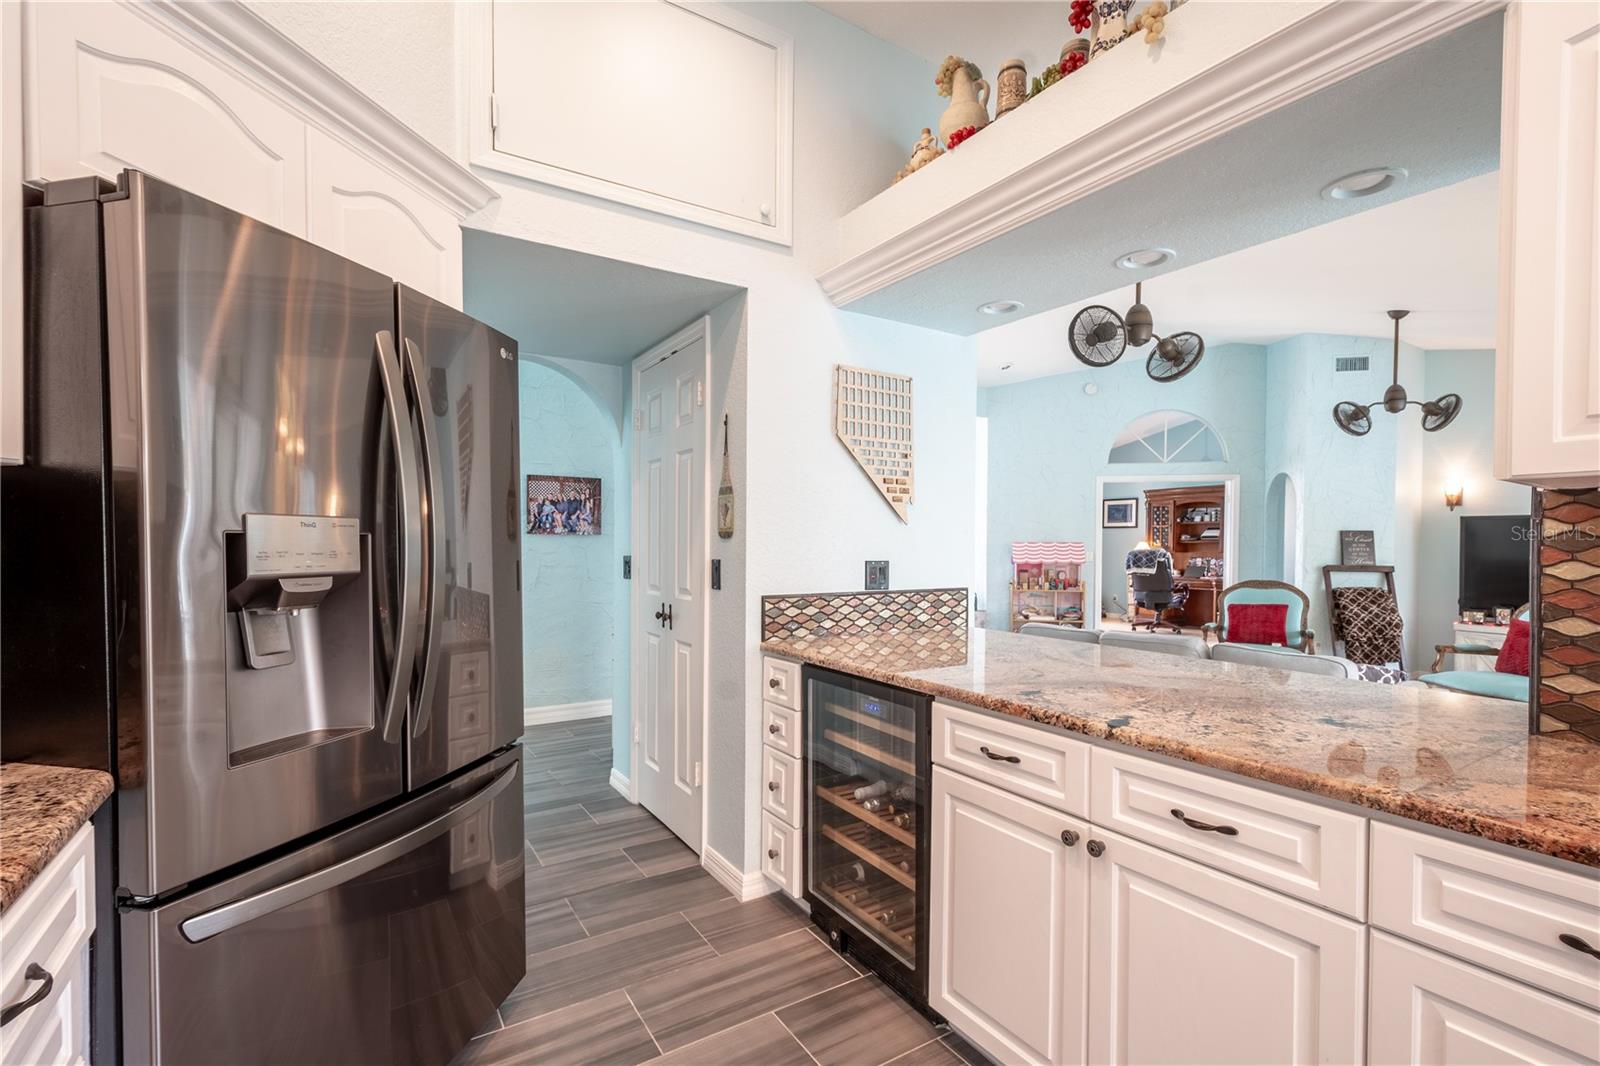 The kitchen features a ceramic tile wood plank floor, recessed lighting and a full suite of appliances including a wine fridge.